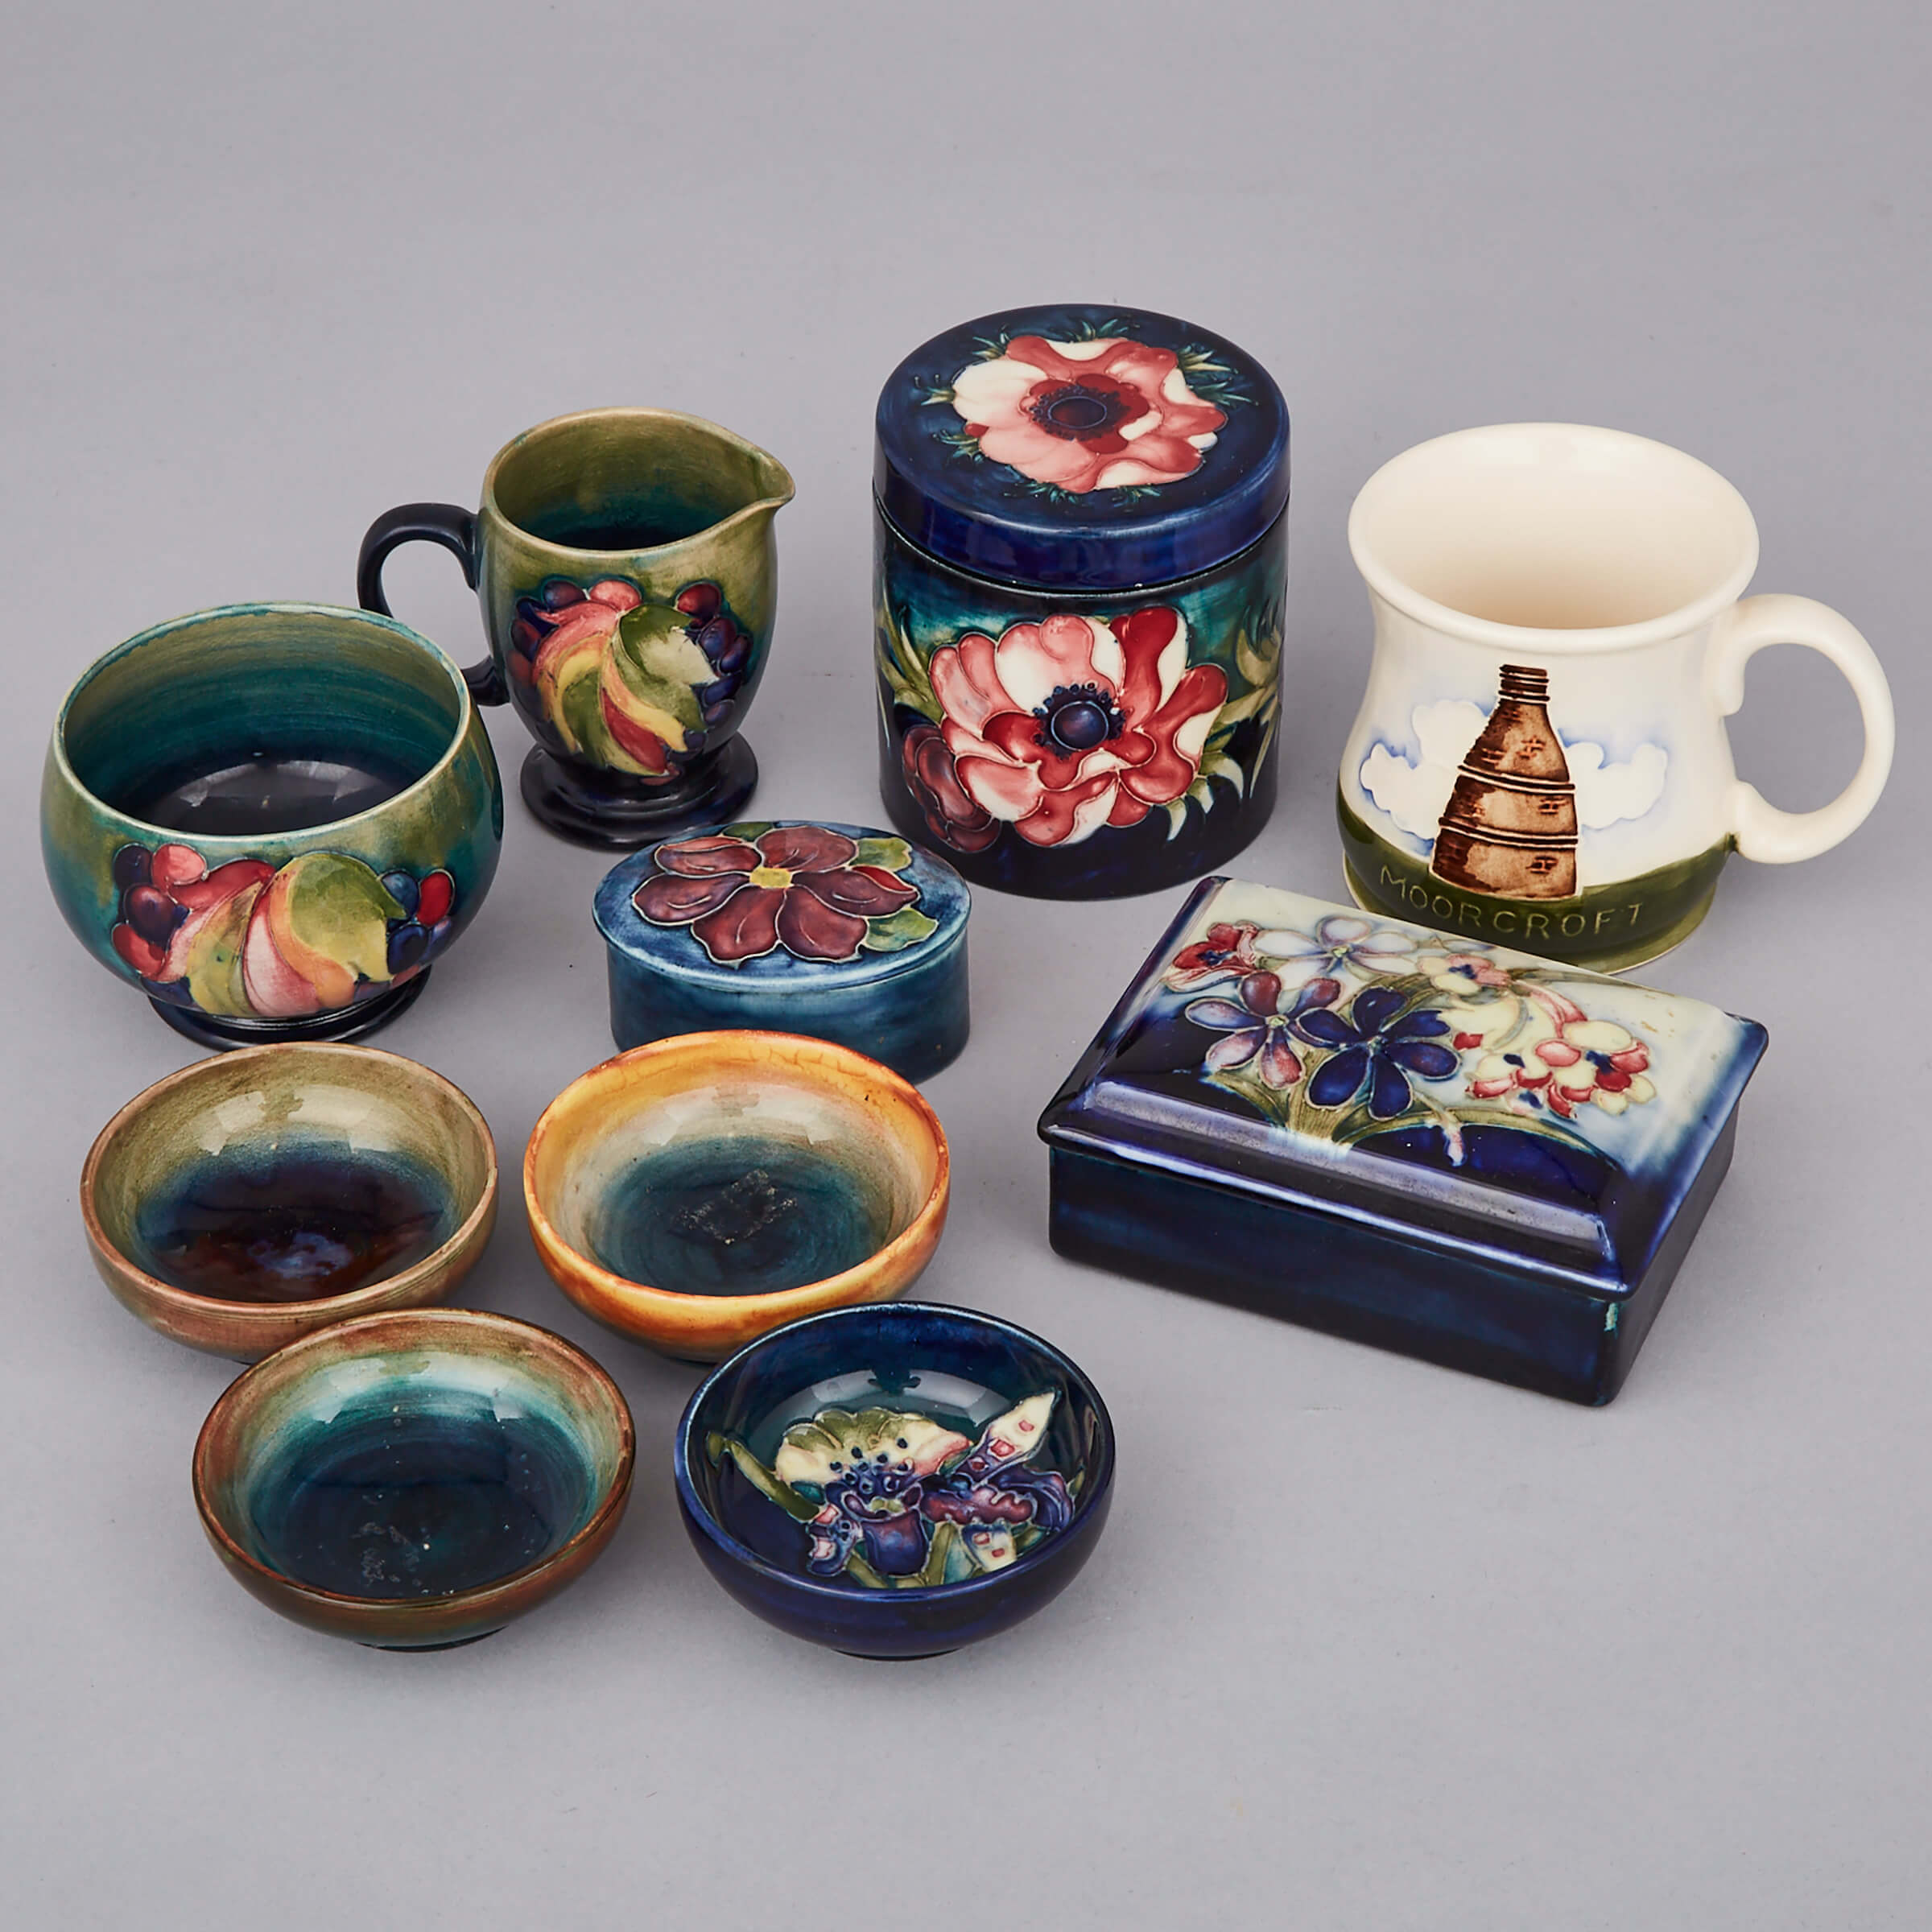 Group of Moorcroft Pottery Articles, 20th century